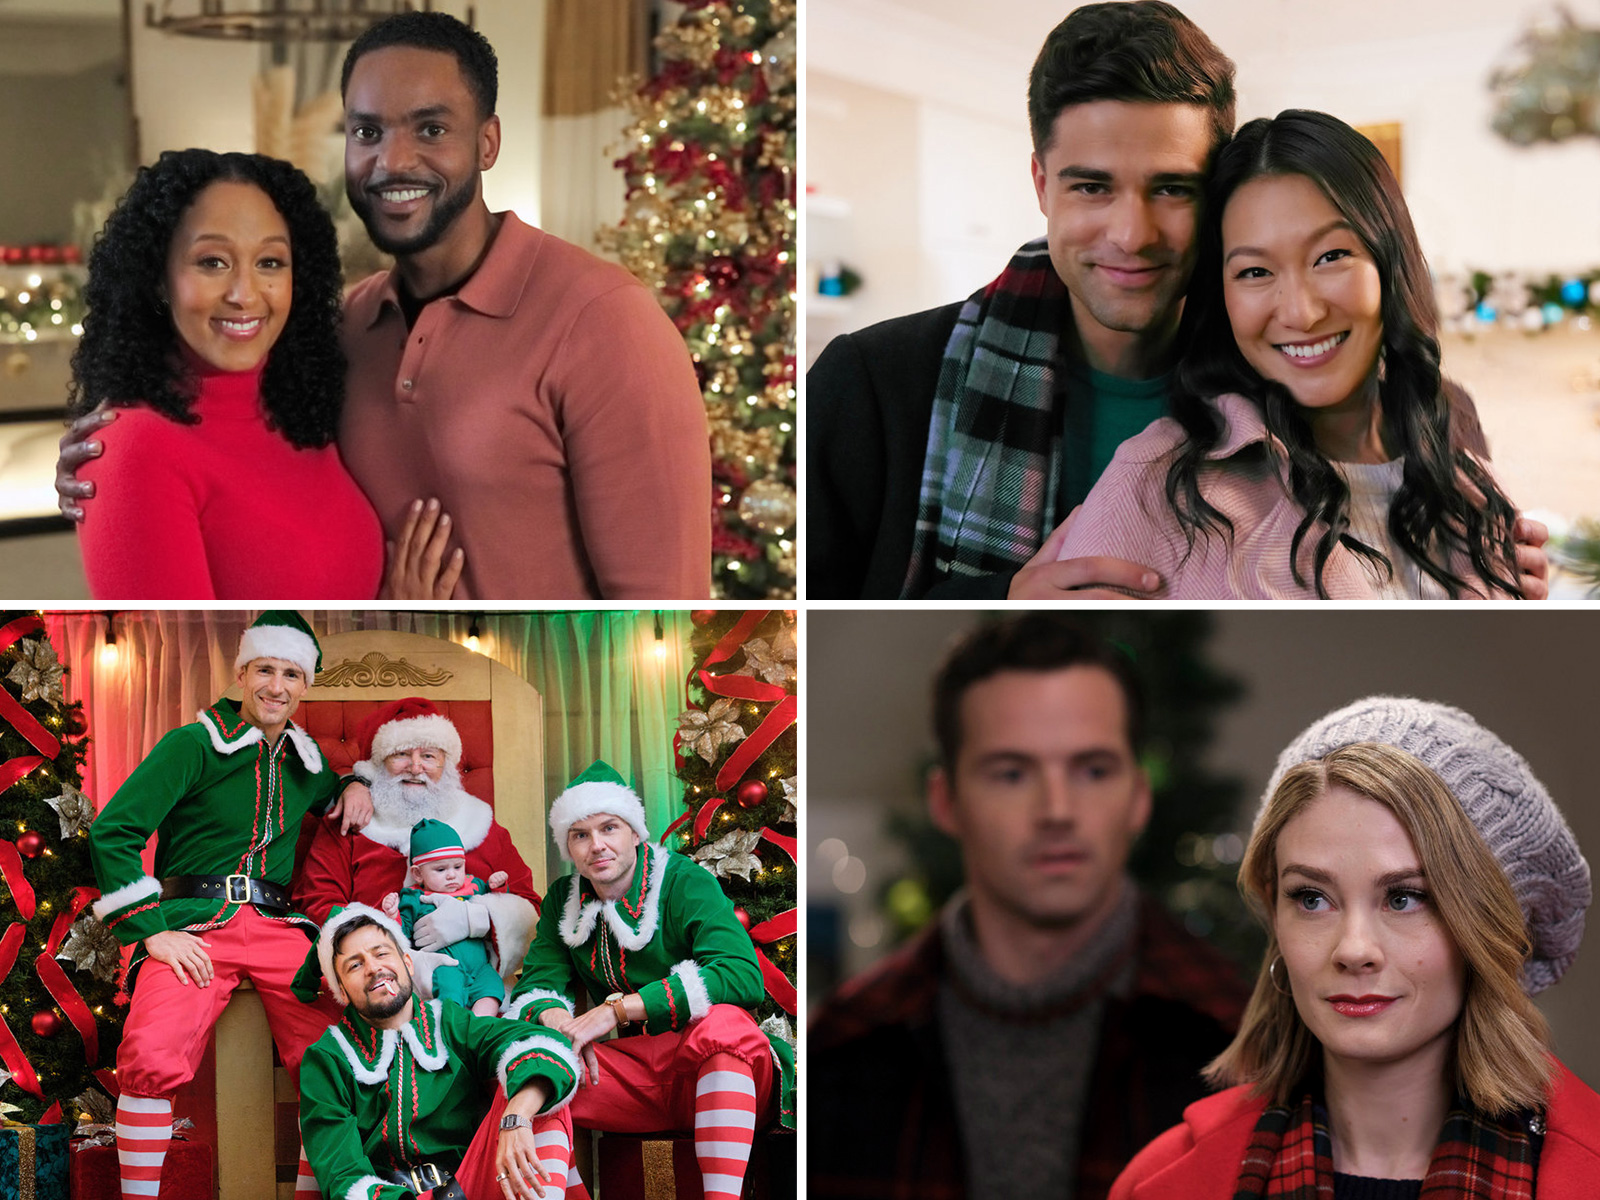 The 25 Most Popular Hallmark Movies in 2022 to Watch This Christmas